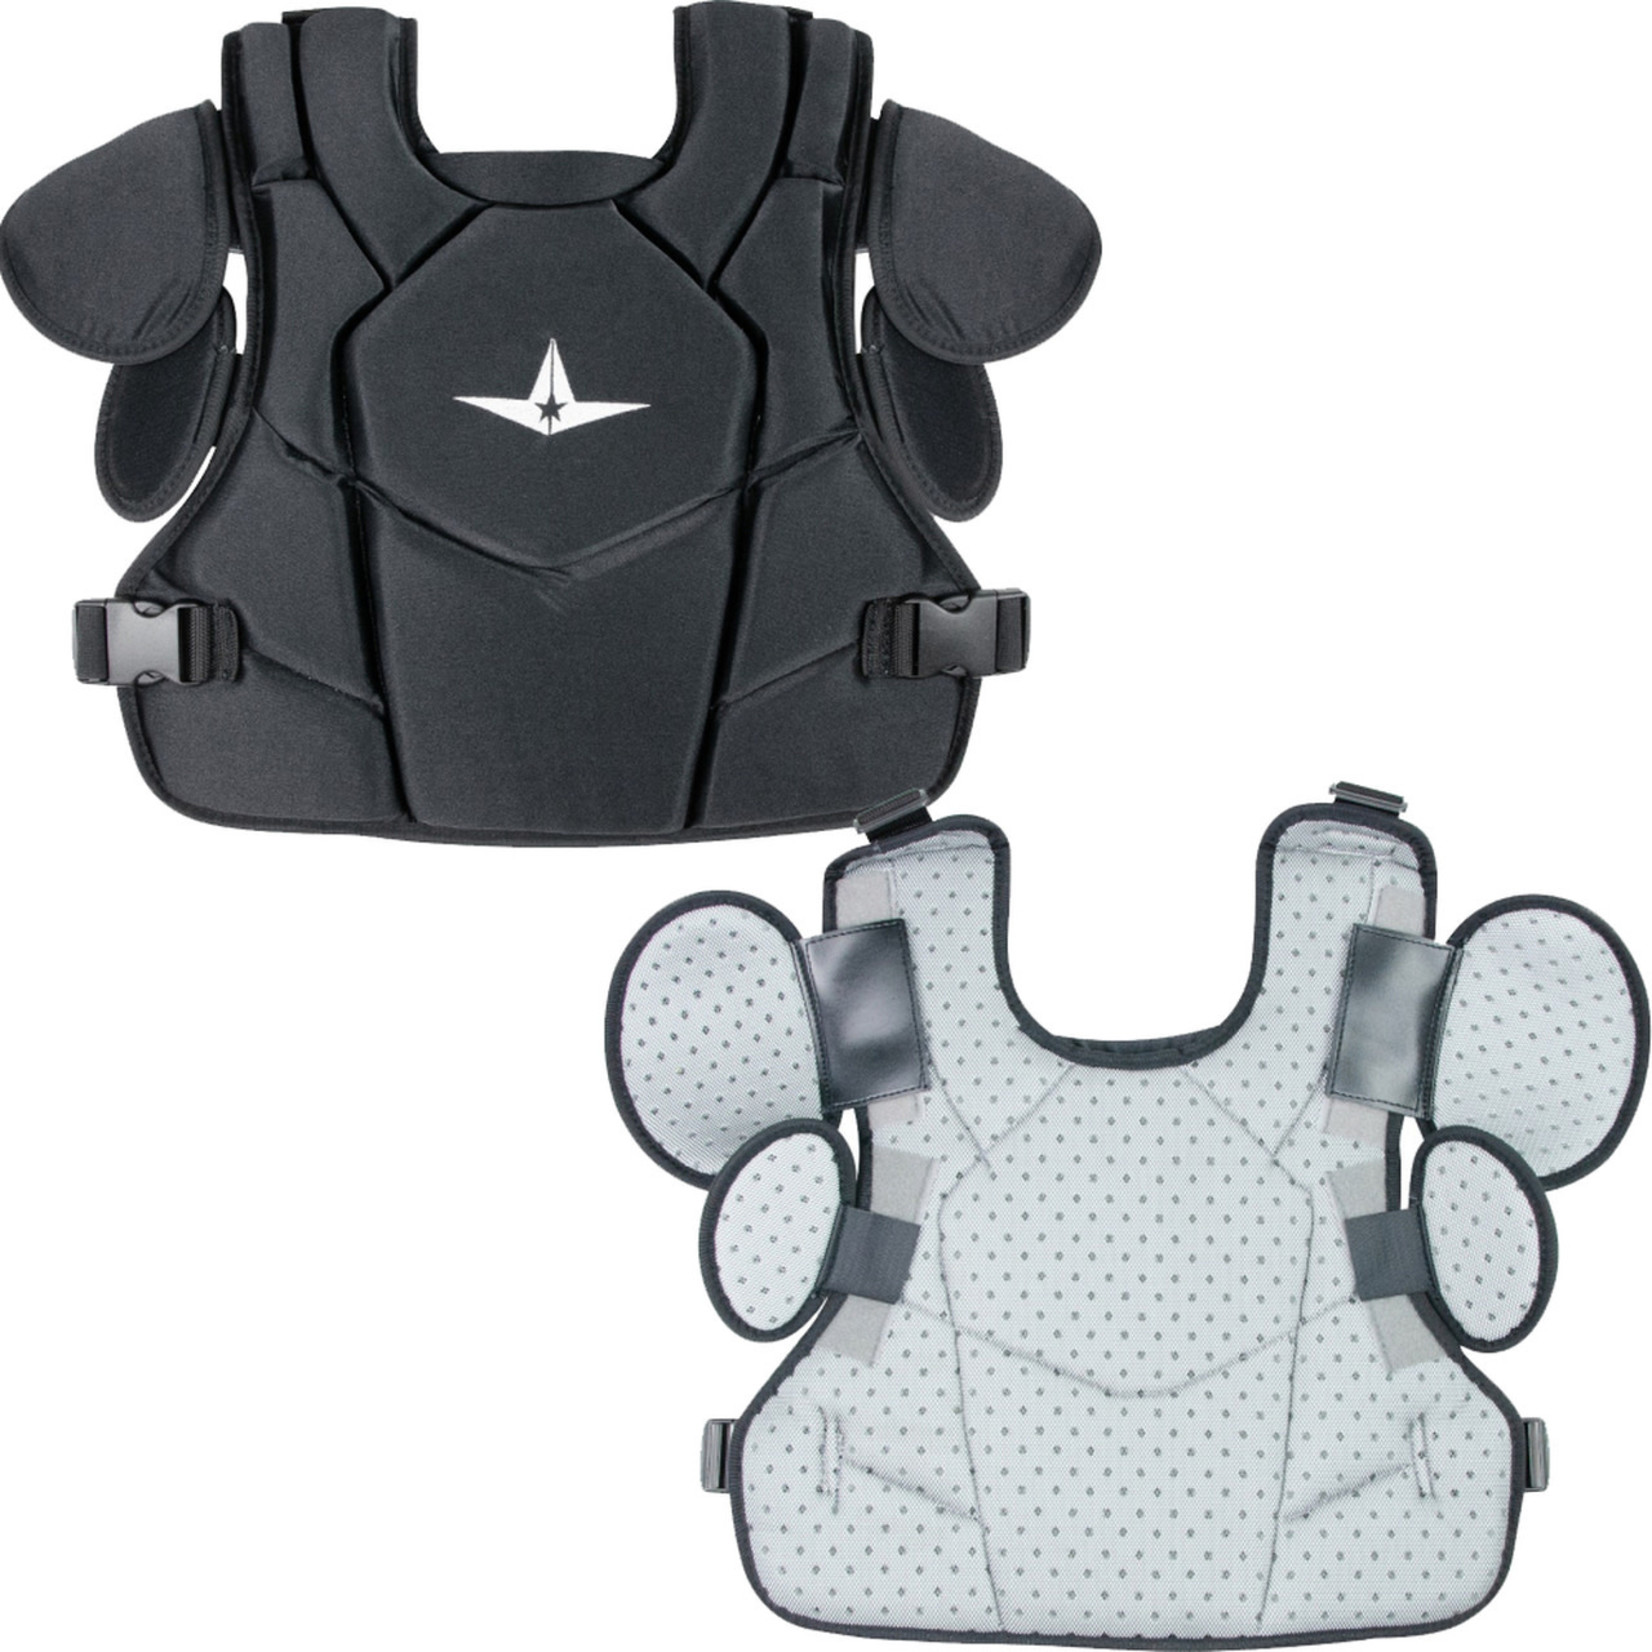 All-Star All Star 13in Umpire Chest Protector